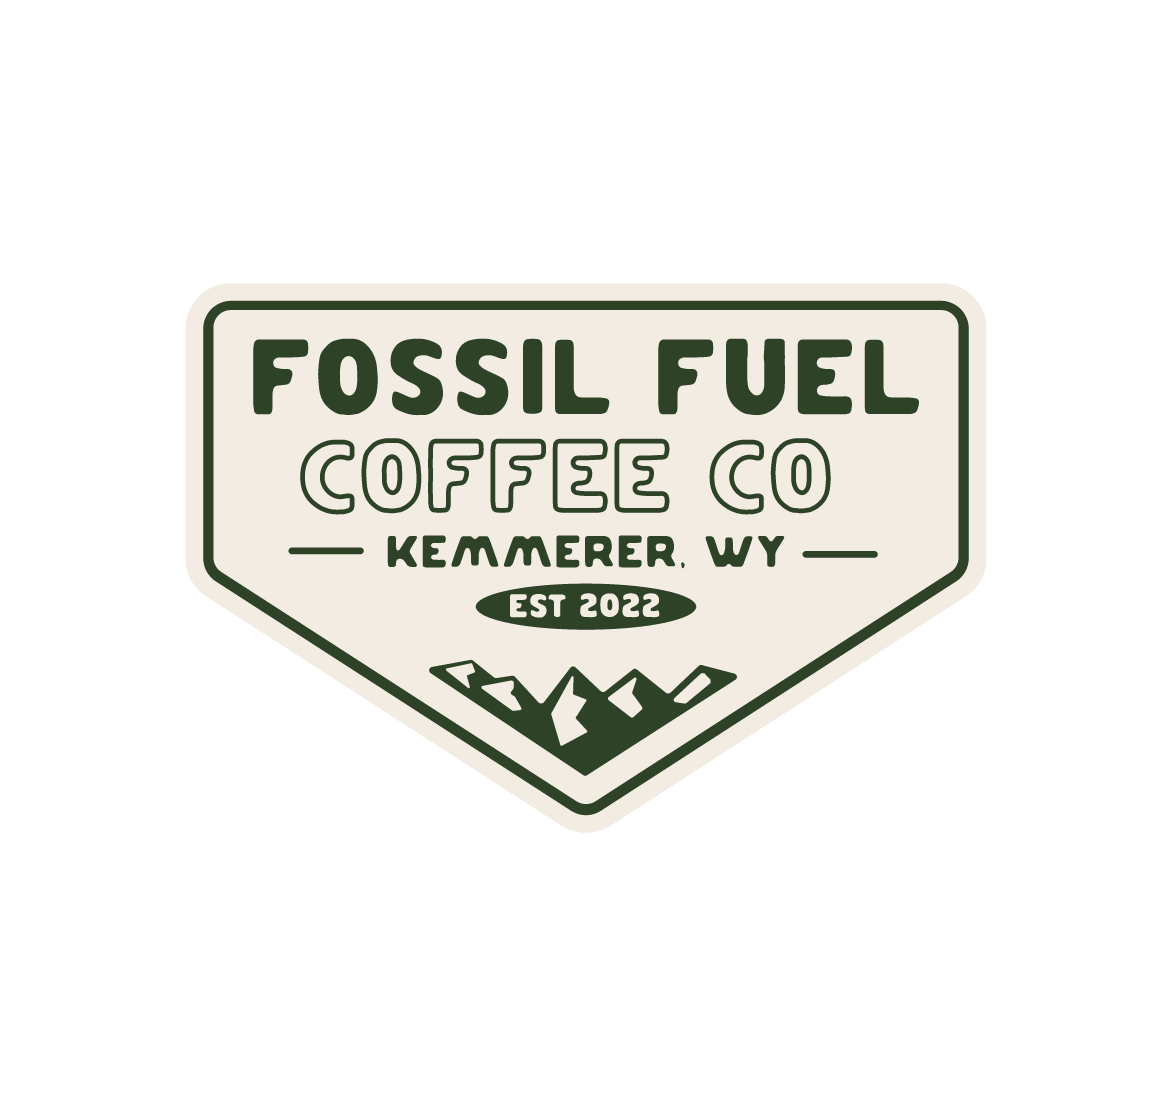 Fossil Fuel Coffee Co.